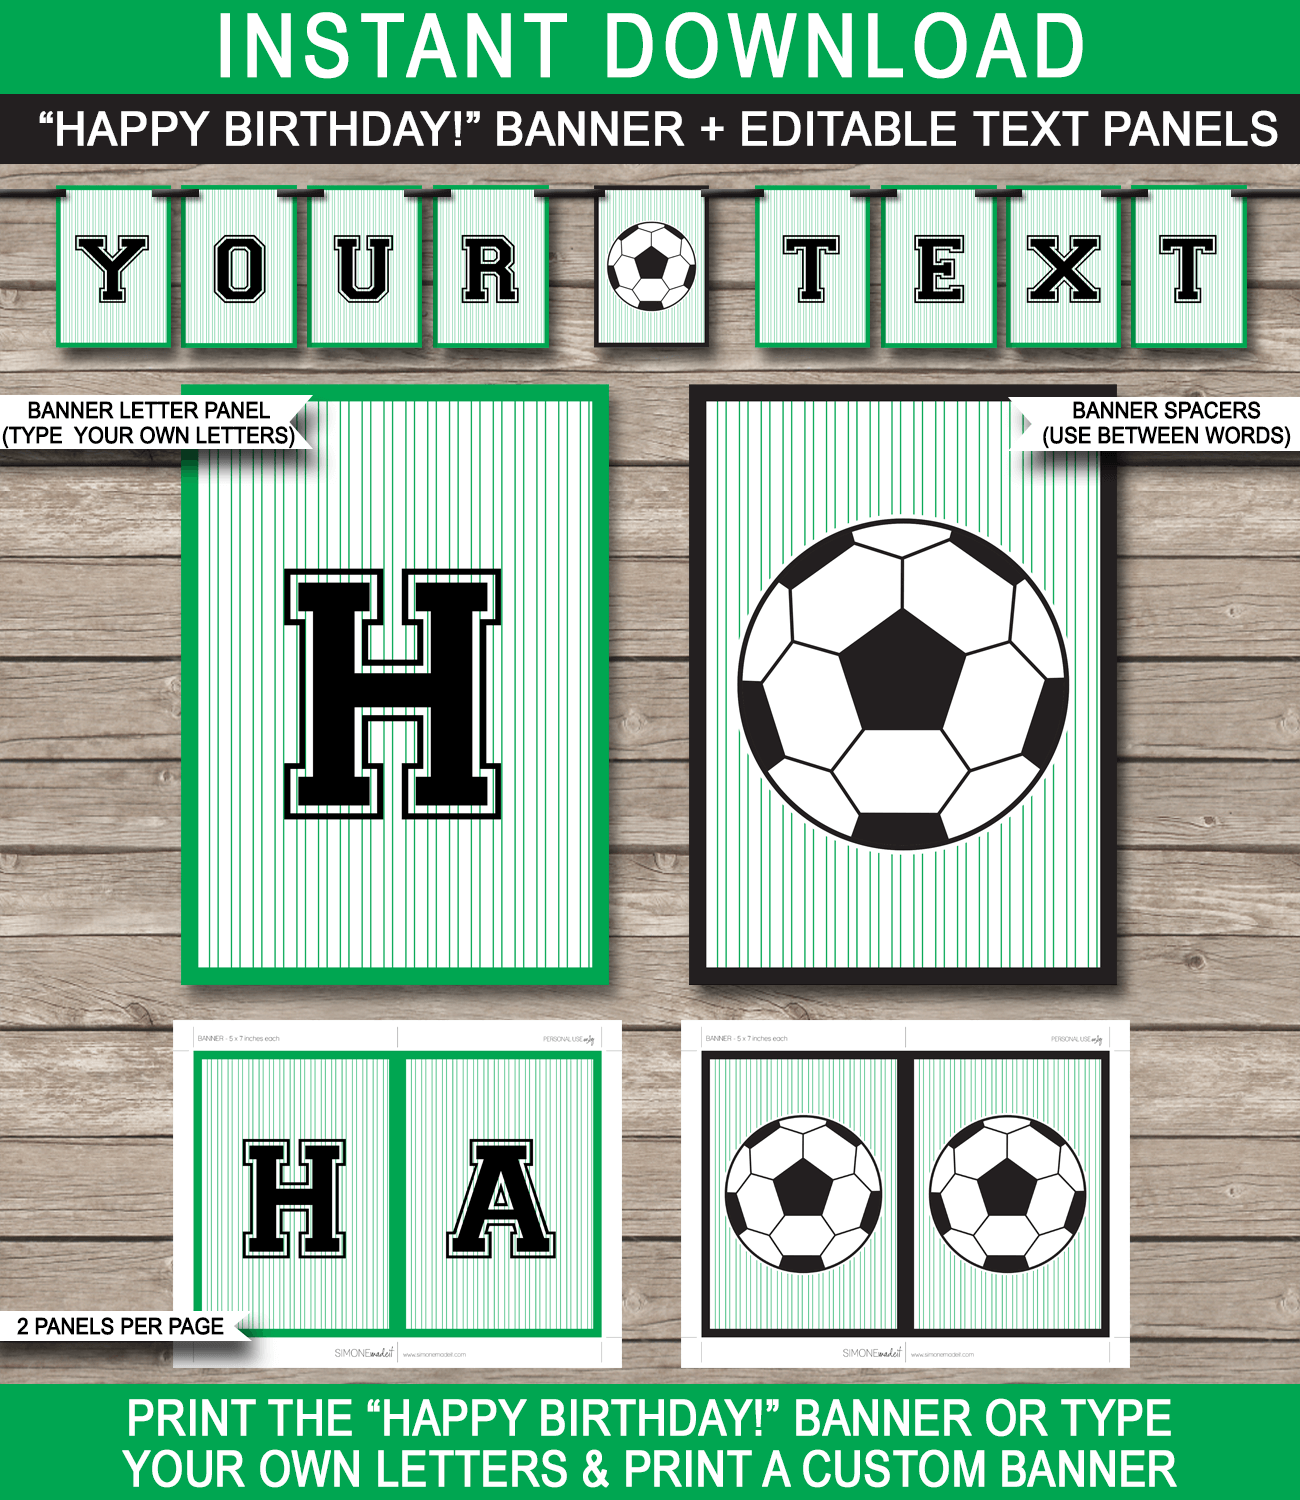 Soccer Party Banner Template - Birthday Party Bunting - Happy Birthday Banner - Editable and Printable DIY Template - INSTANT DOWNLOAD $4.50 via simonemadeit.com